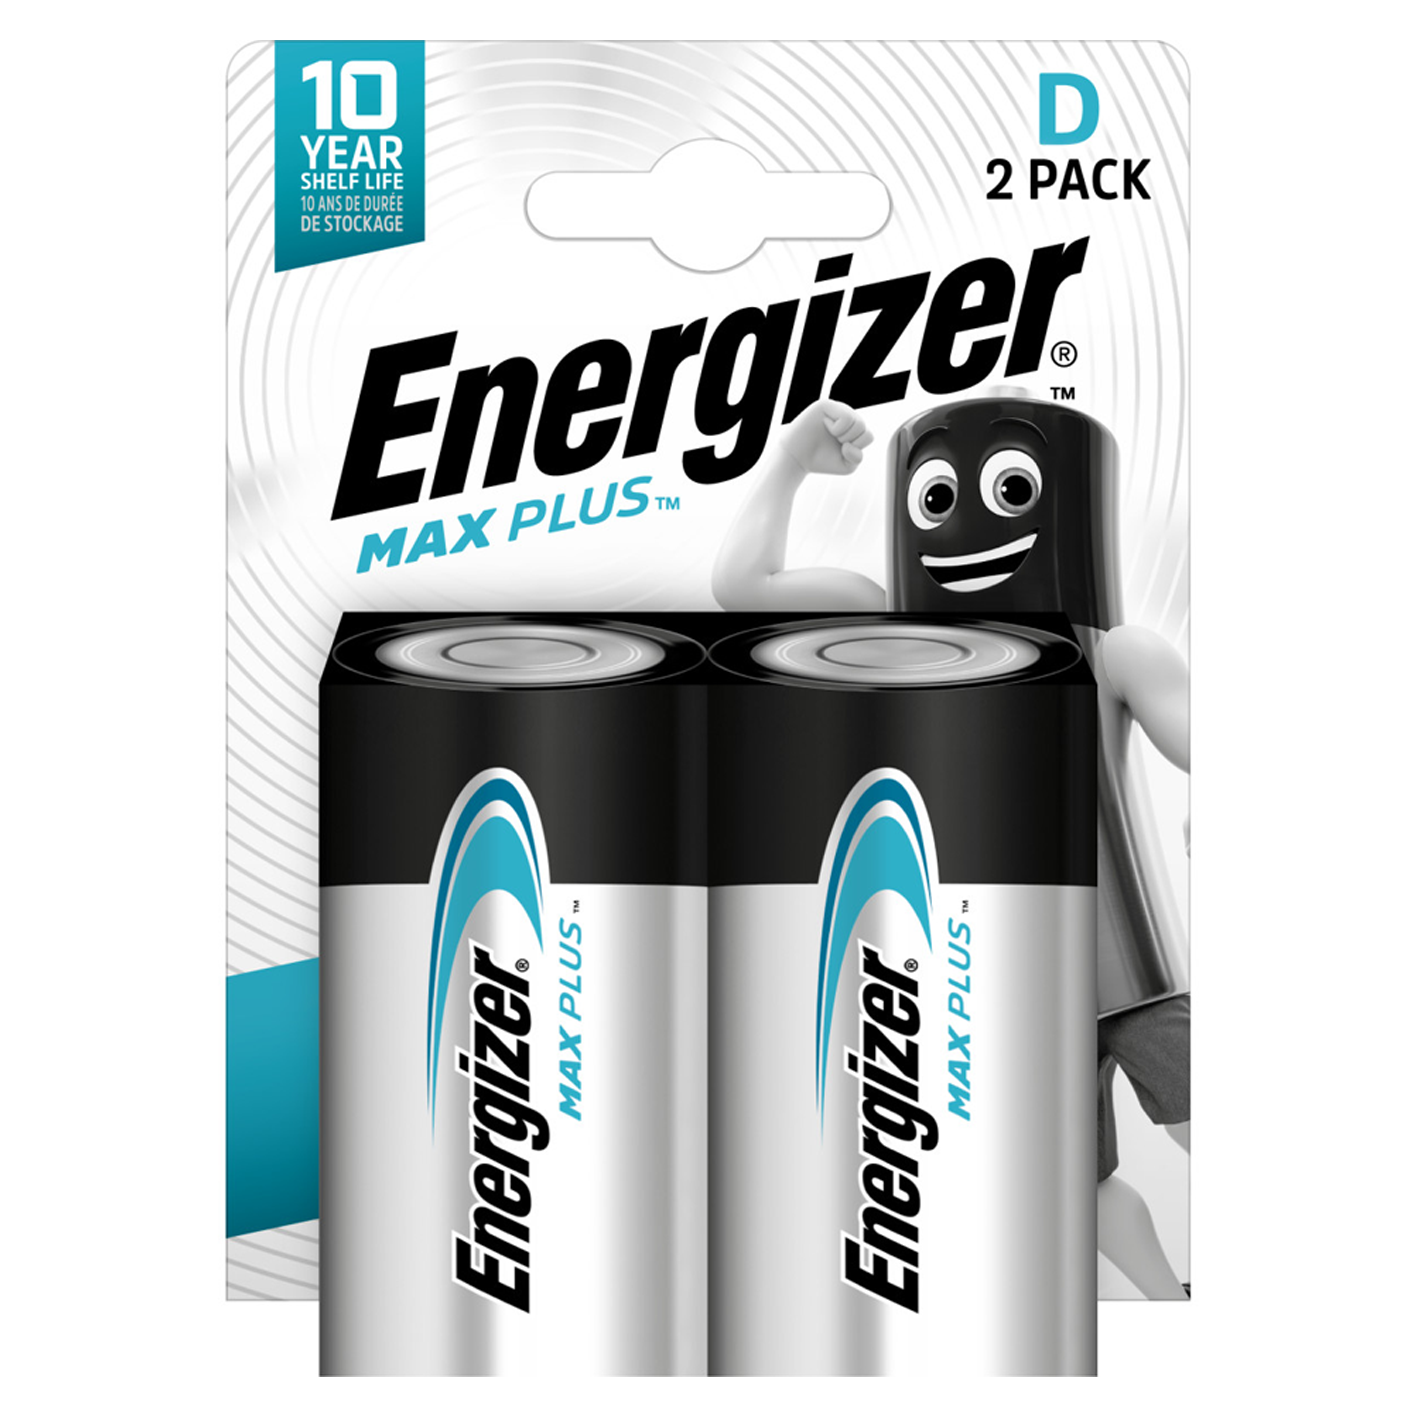 Energizer® D Size Max Plus Alkaline, Pack of 2